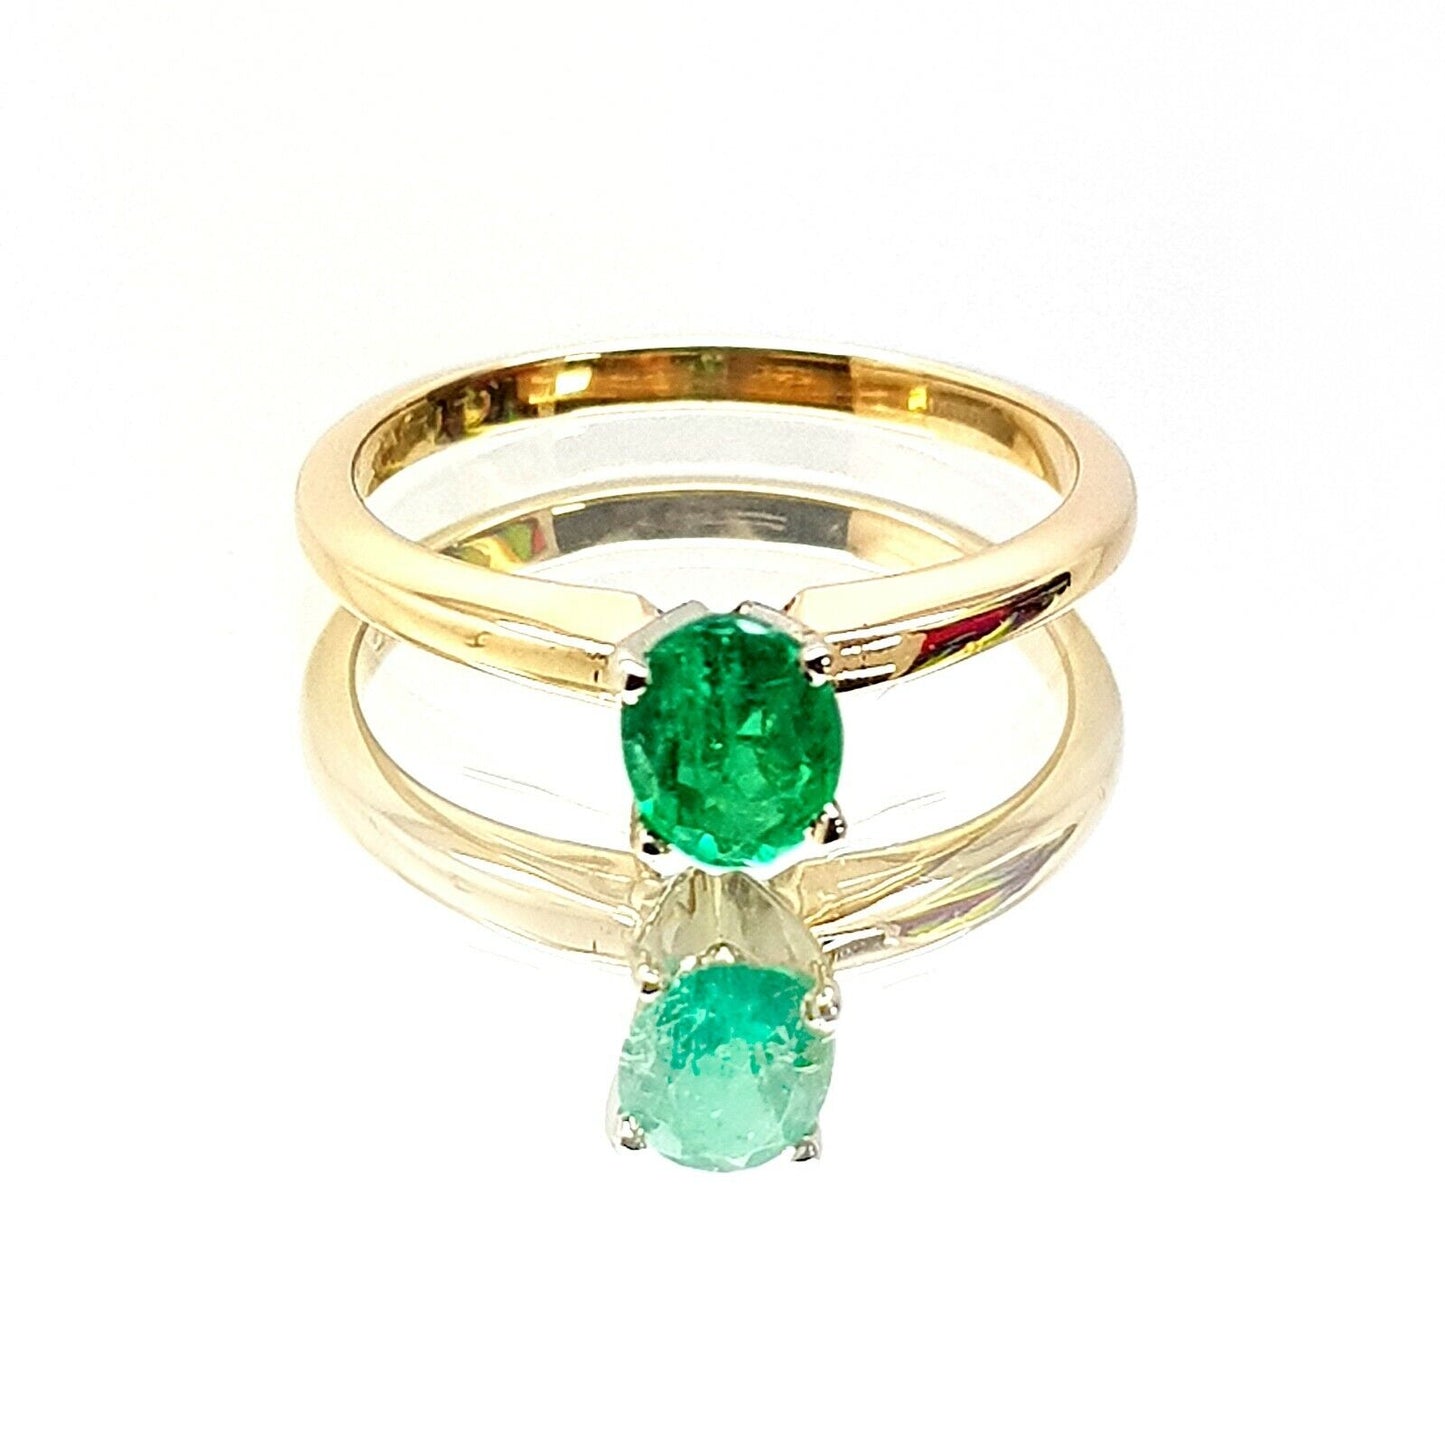 0.37ct Oval Cut Emerald Solitaire Ring in 14k Yellow Gold 5.5us